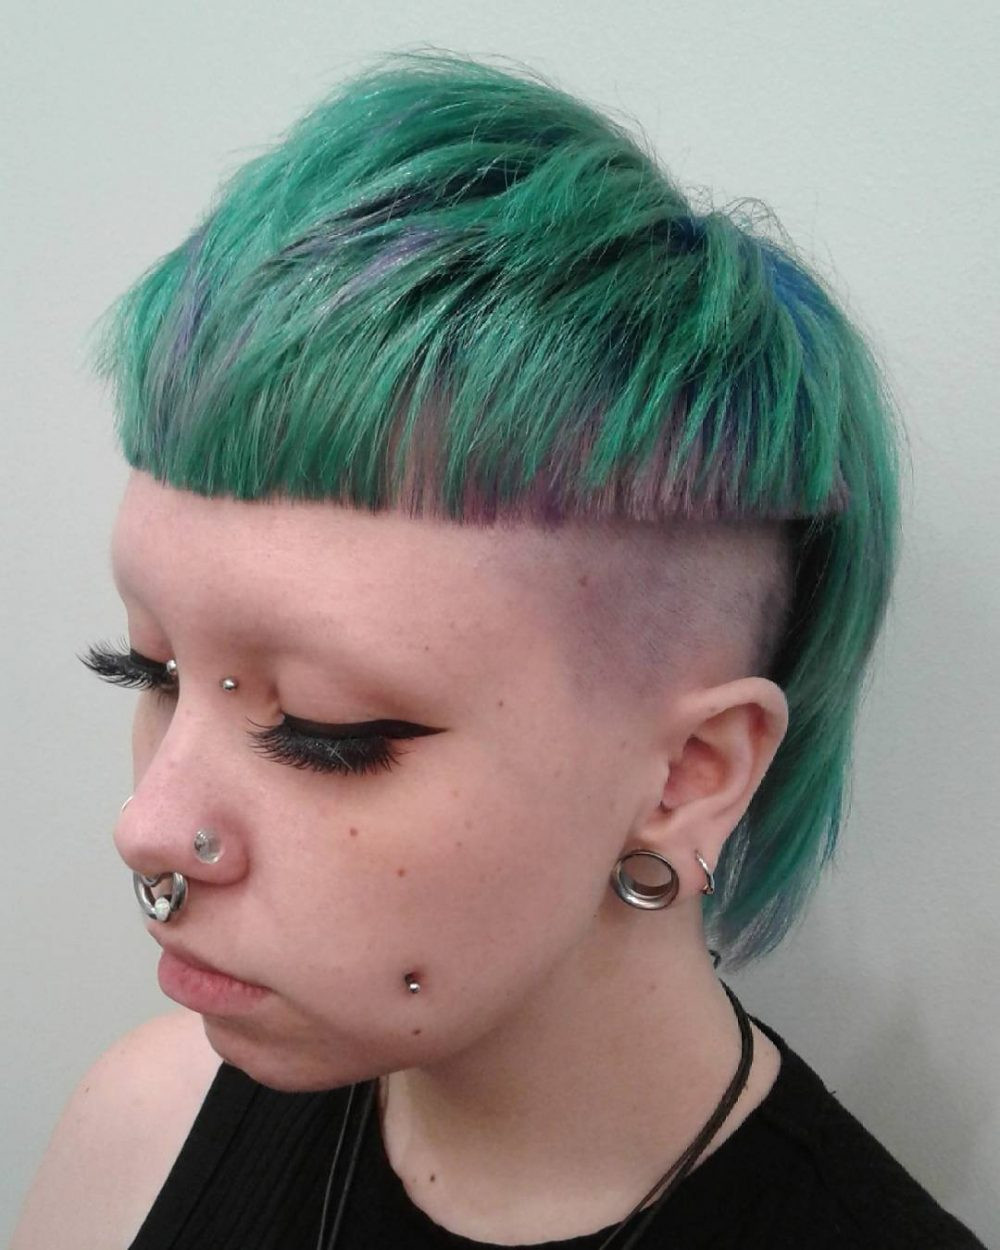 Women Punk Hairstyle
 31 Punk Hairstyles Like You’ve Never Seen Before